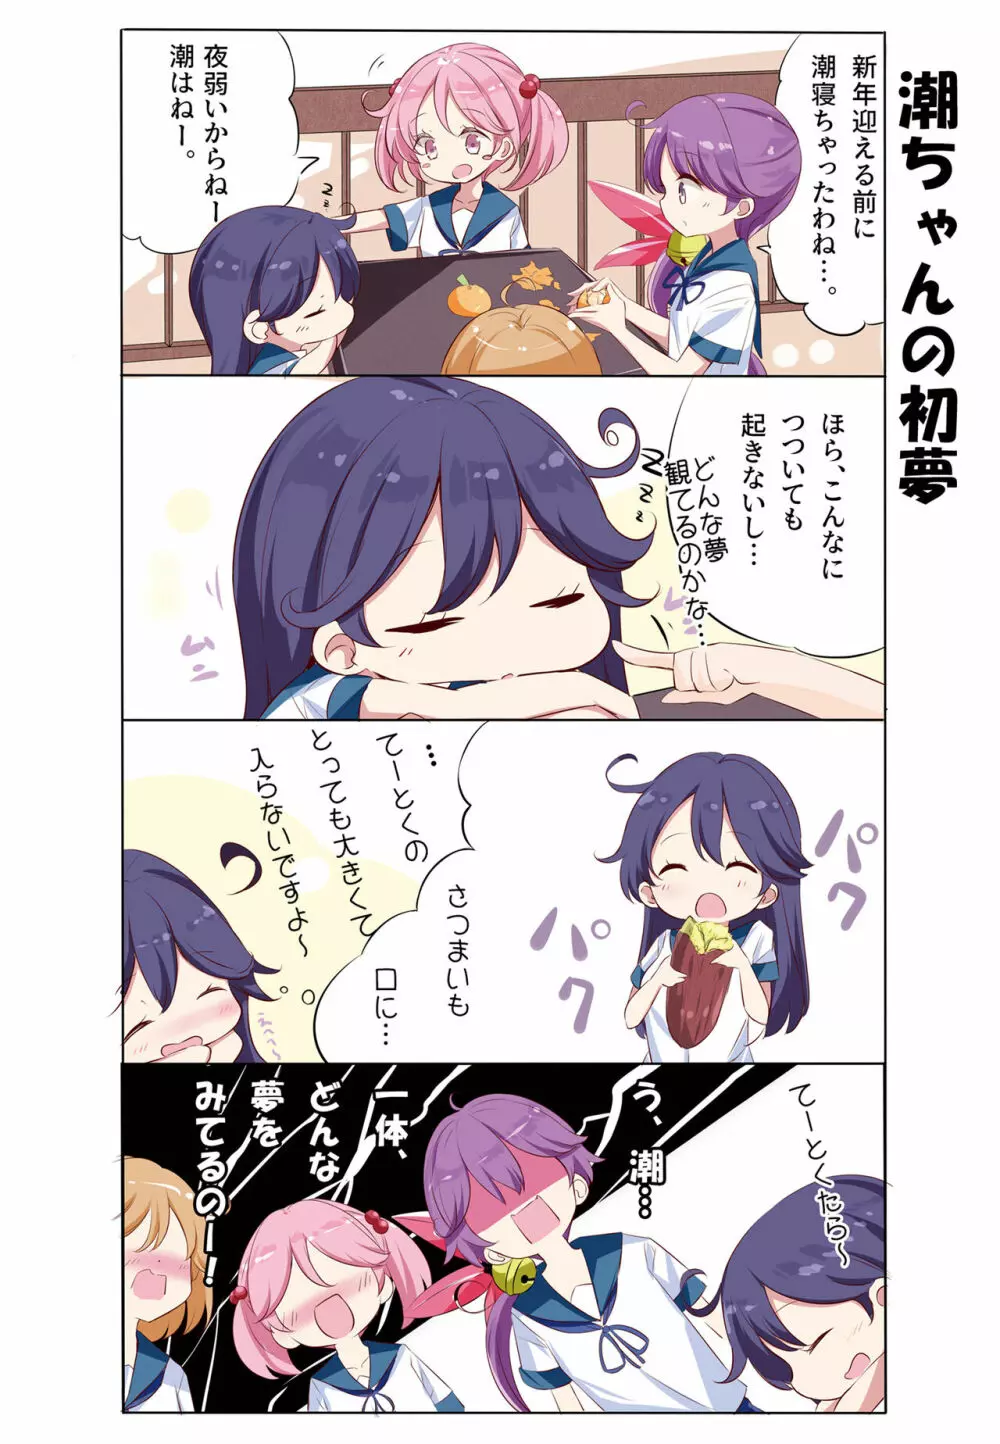 hamaken collection 総集編vol 9～12 プラス 七駆の乳くらべ Page.65